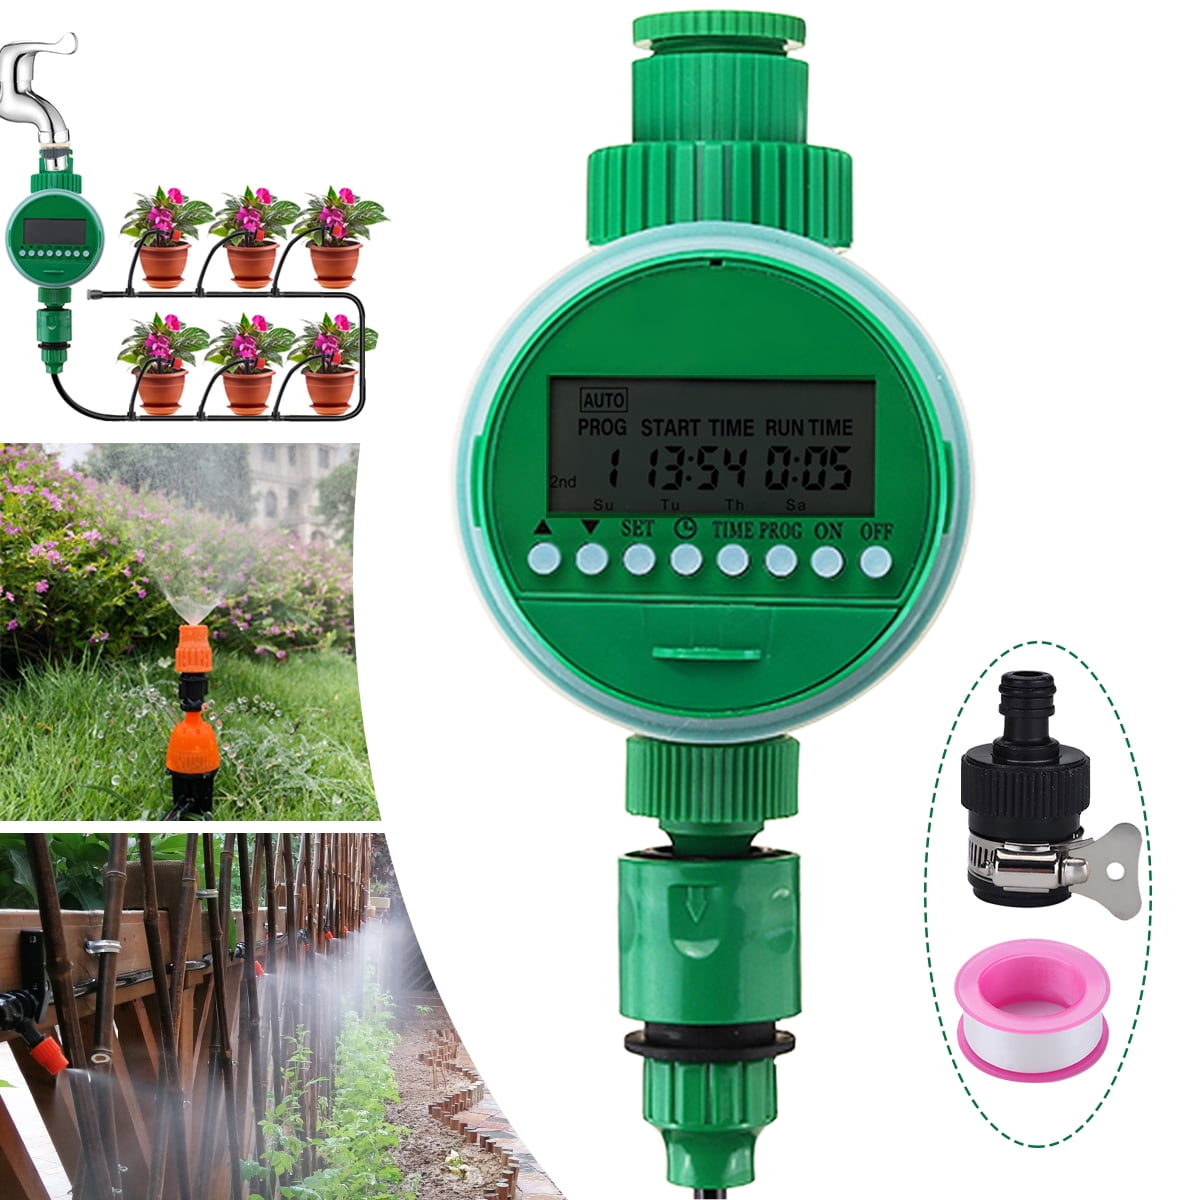 Zerodis Solar Powered Automatic Watering Timer,Fit 1/2 Intelligent Irrigation Controller with LCD Digital Screen for Home Garden Greenhouse Plant Grass 